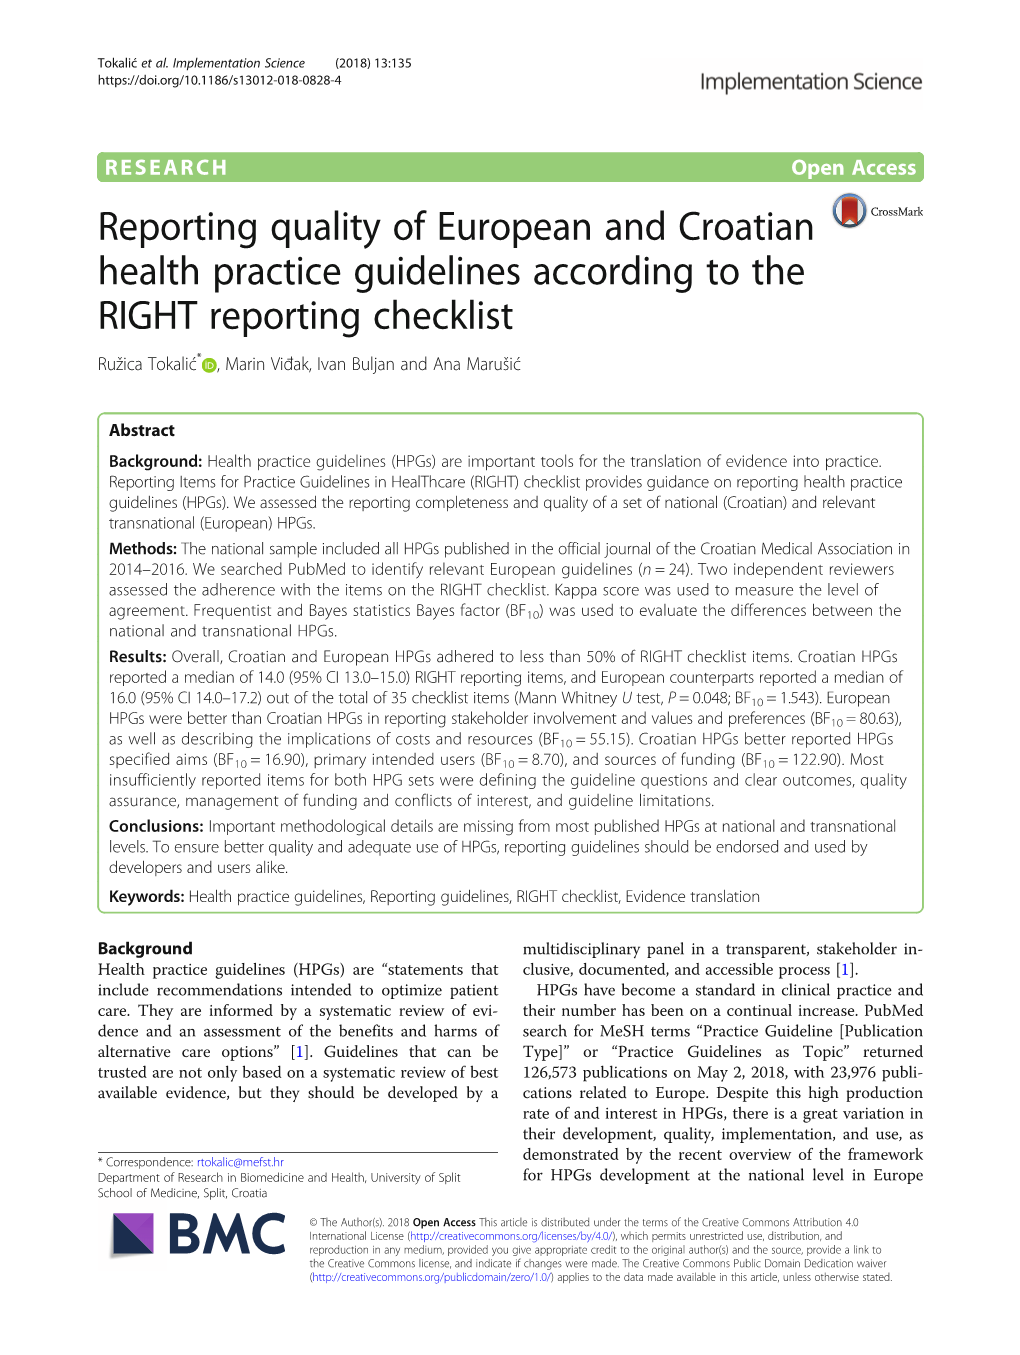 Reporting Quality of European and Croatian Health Practice Guidelines According to the RIGHT Reporting Checklist